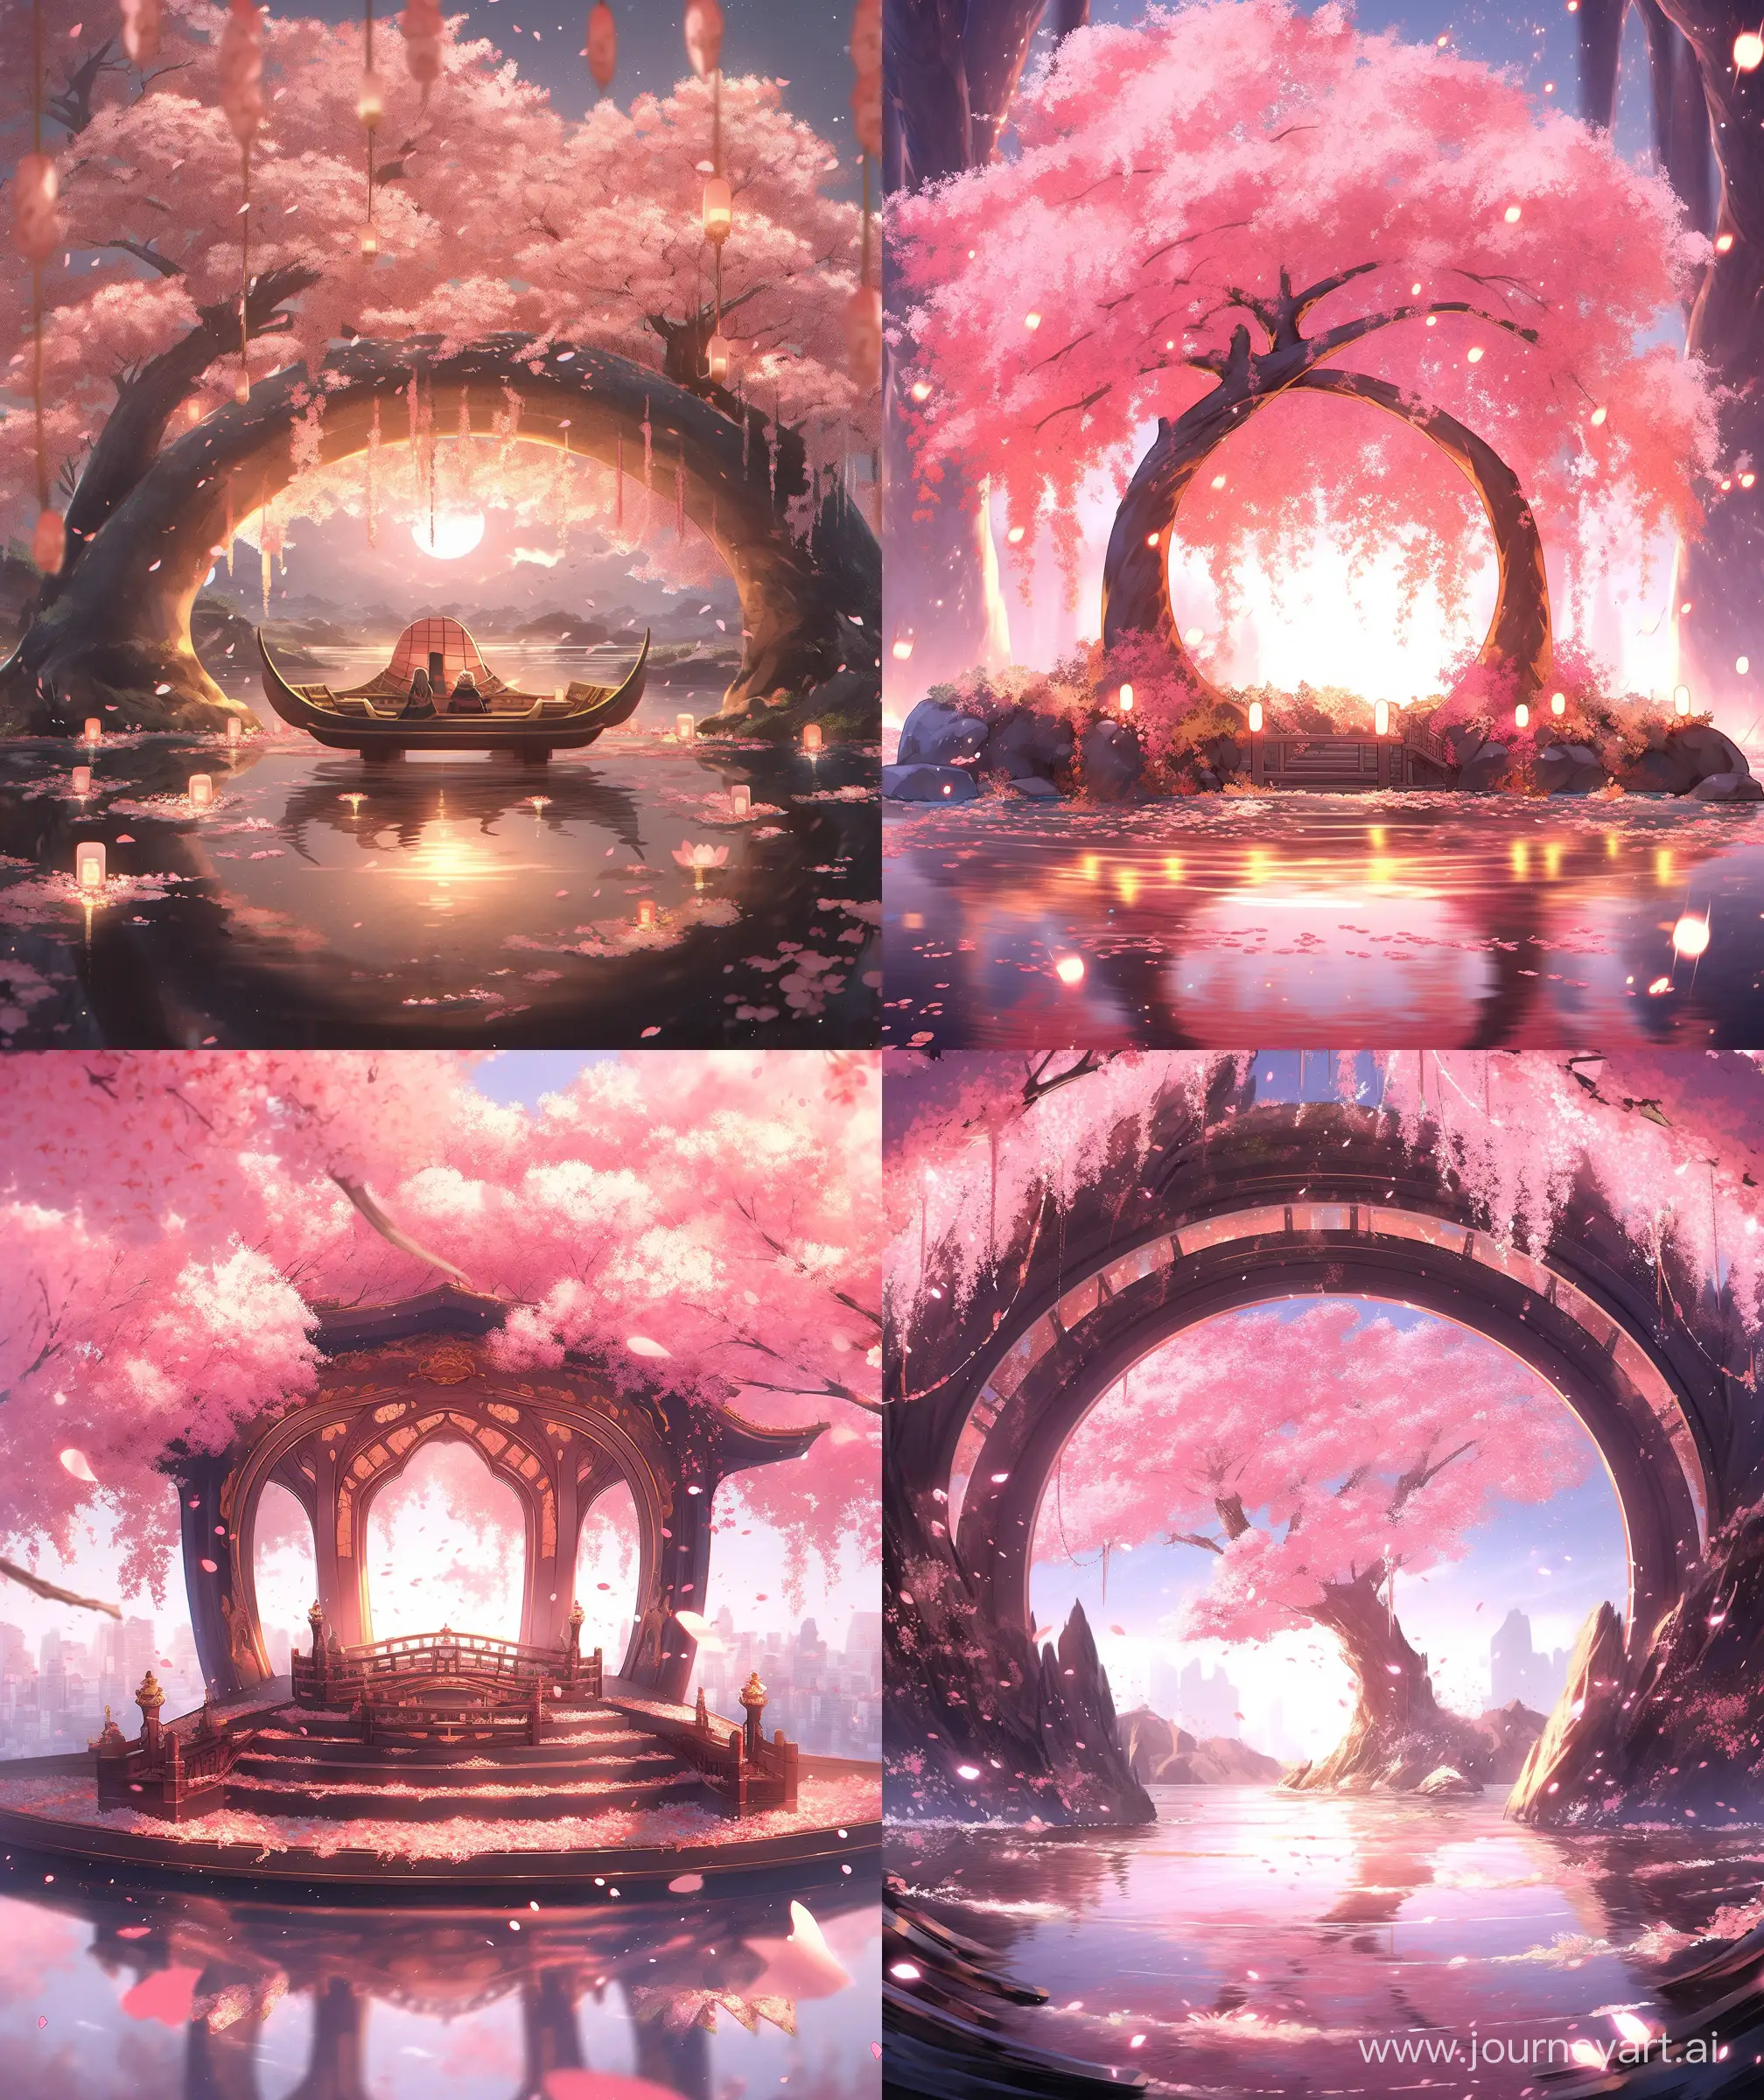 Surreal-Anime-Fantasy-Landscape-with-Glowing-Arch-and-Cherry-Blossom-Trees